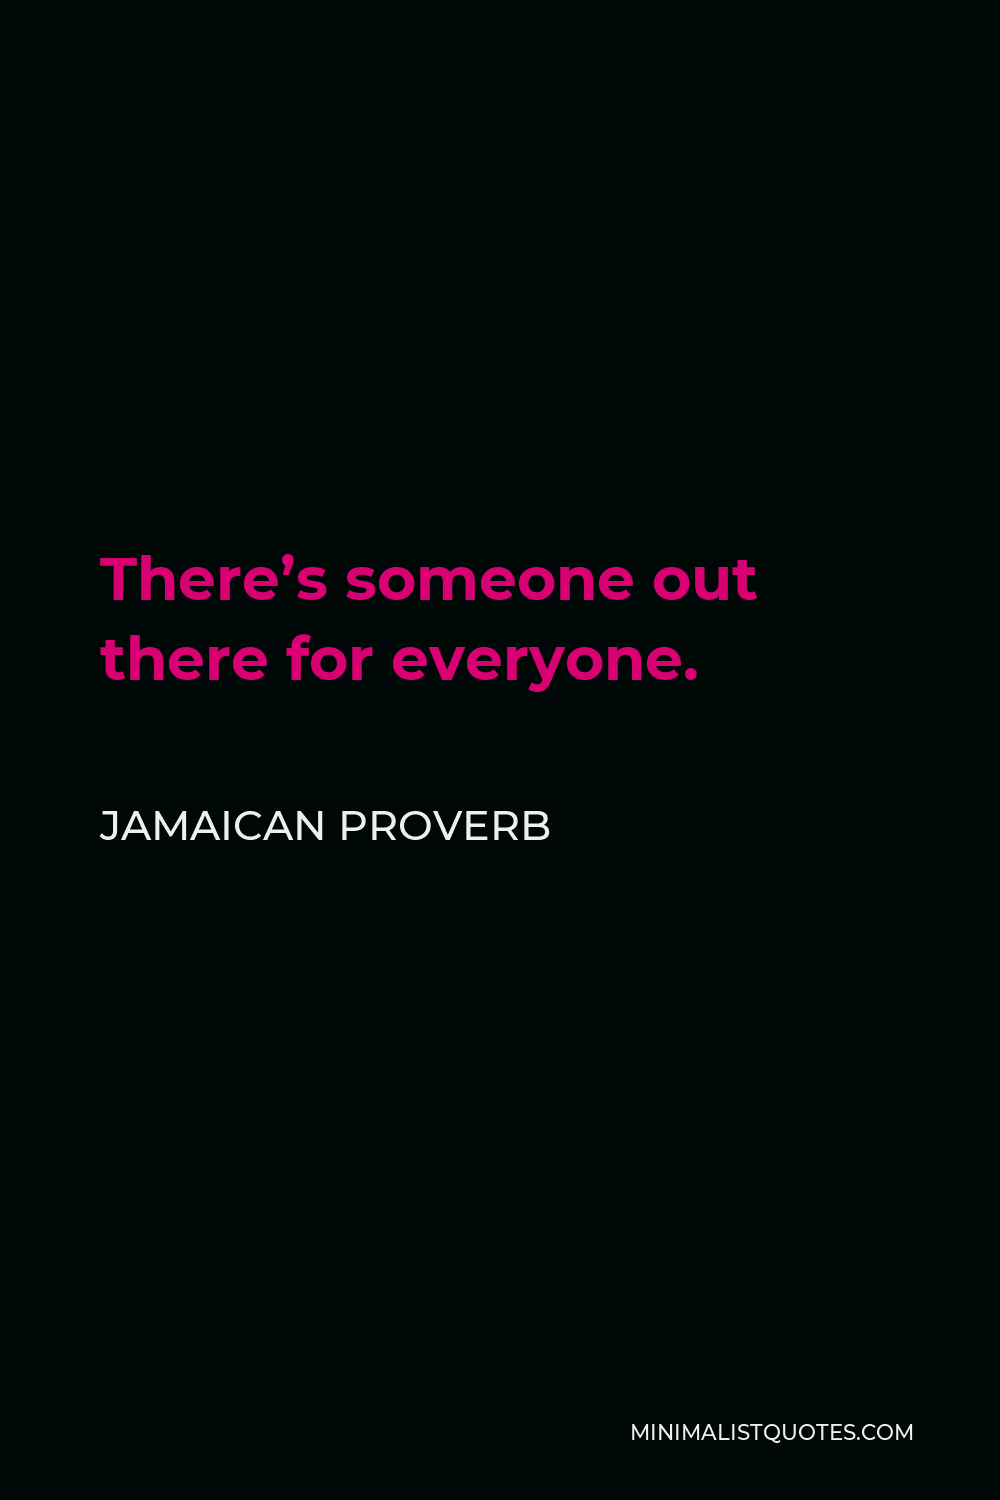 Jamaican Proverb Quote - There’s someone out there for everyone.